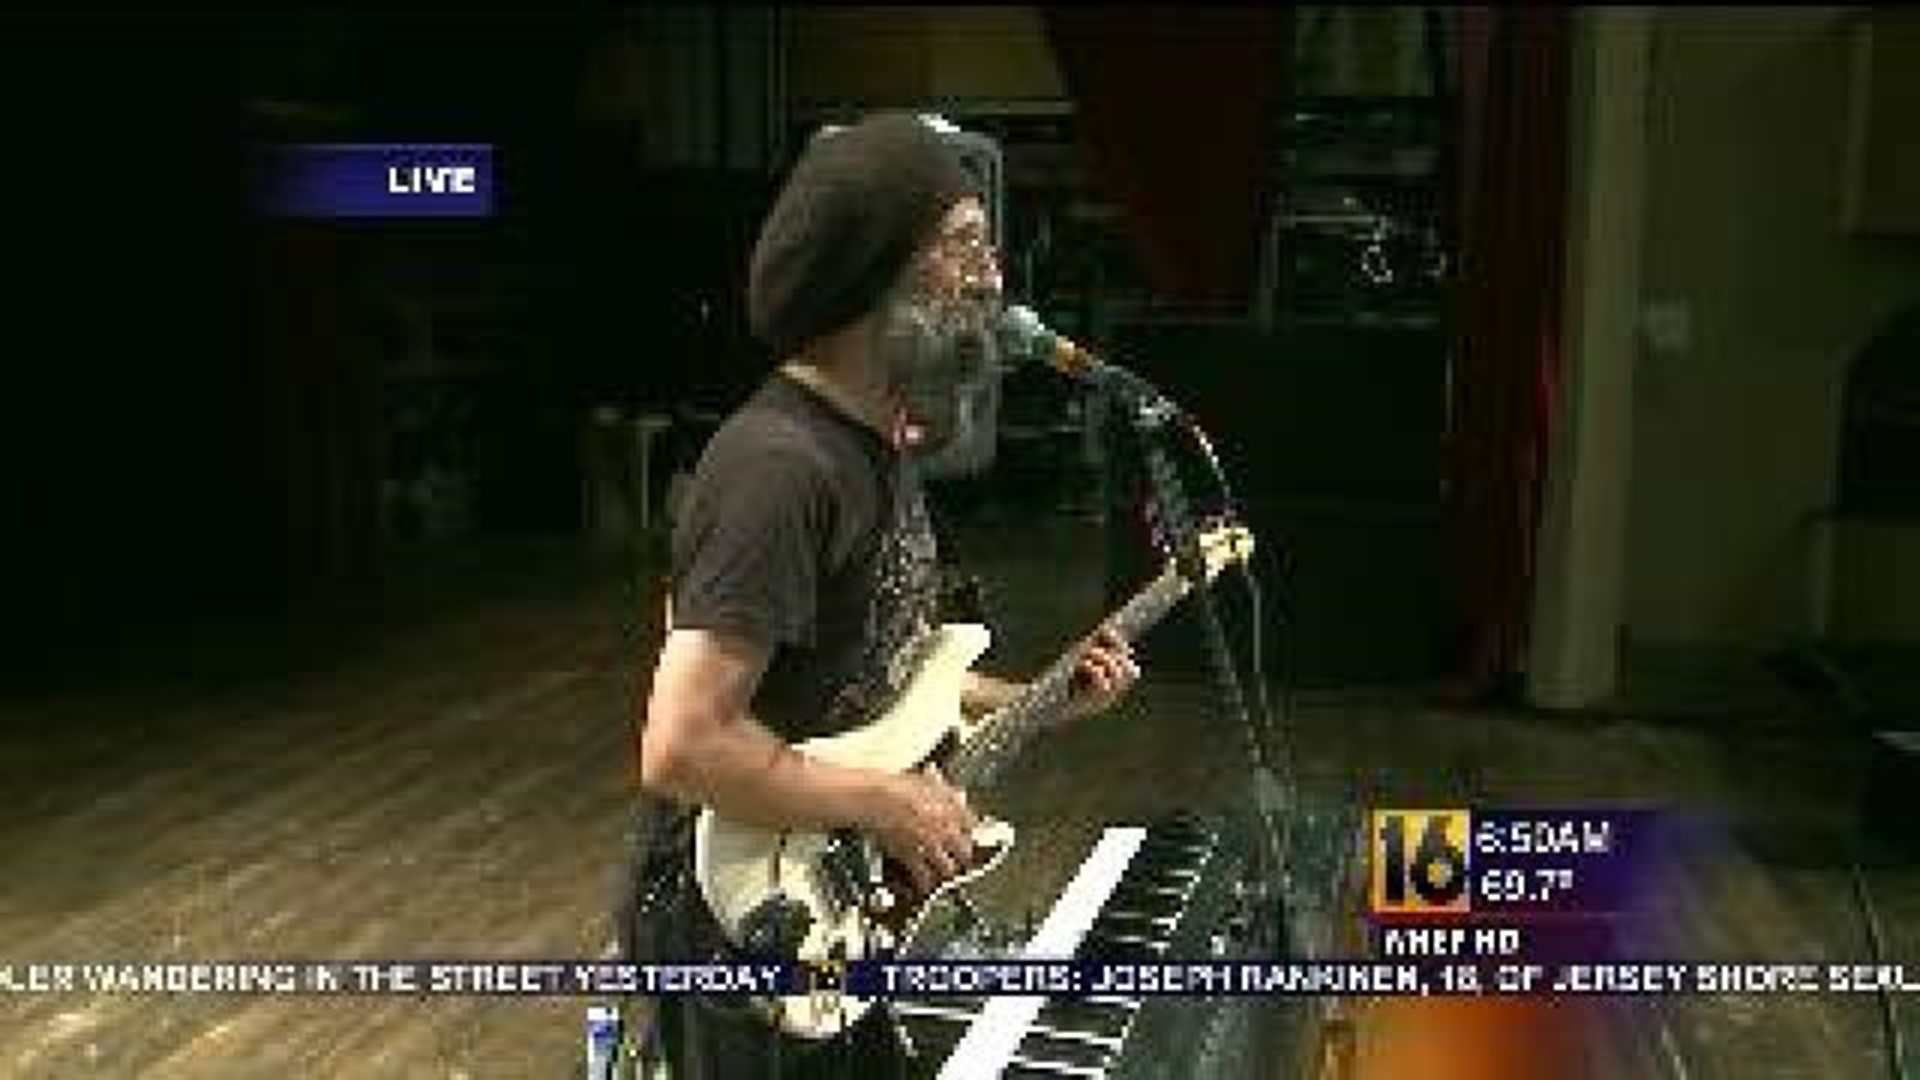 Area Musicians Gear Up for StroudFest 2013